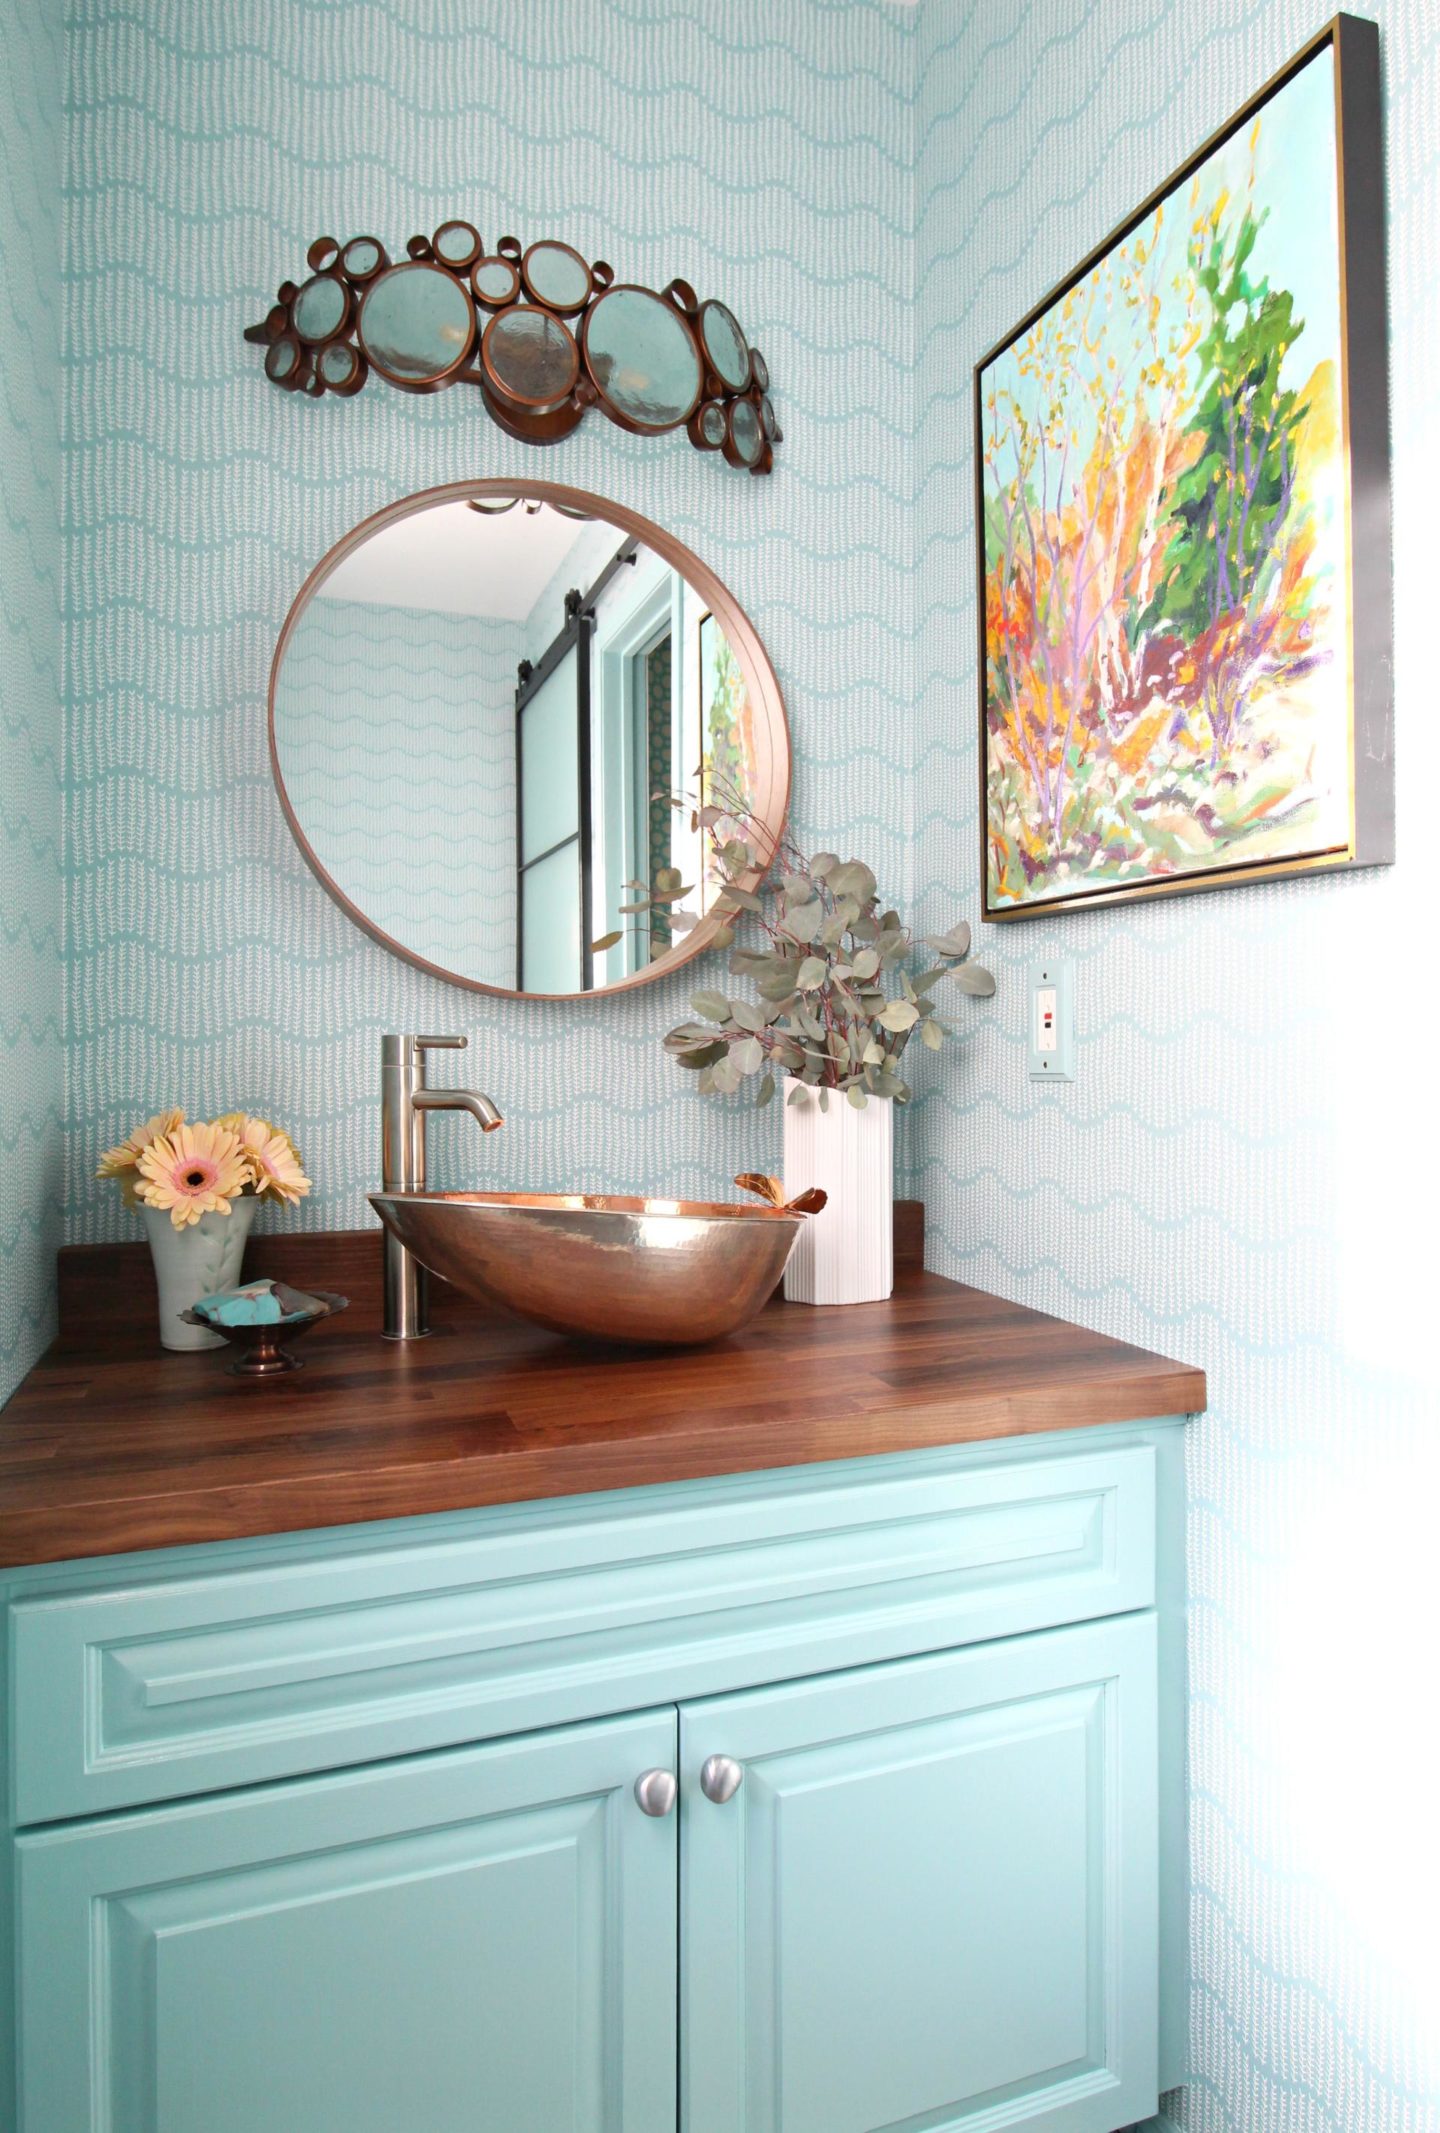 Turquoise And Copper Powder Room Makeover Reveal - Bathroom - HD Wallpaper 